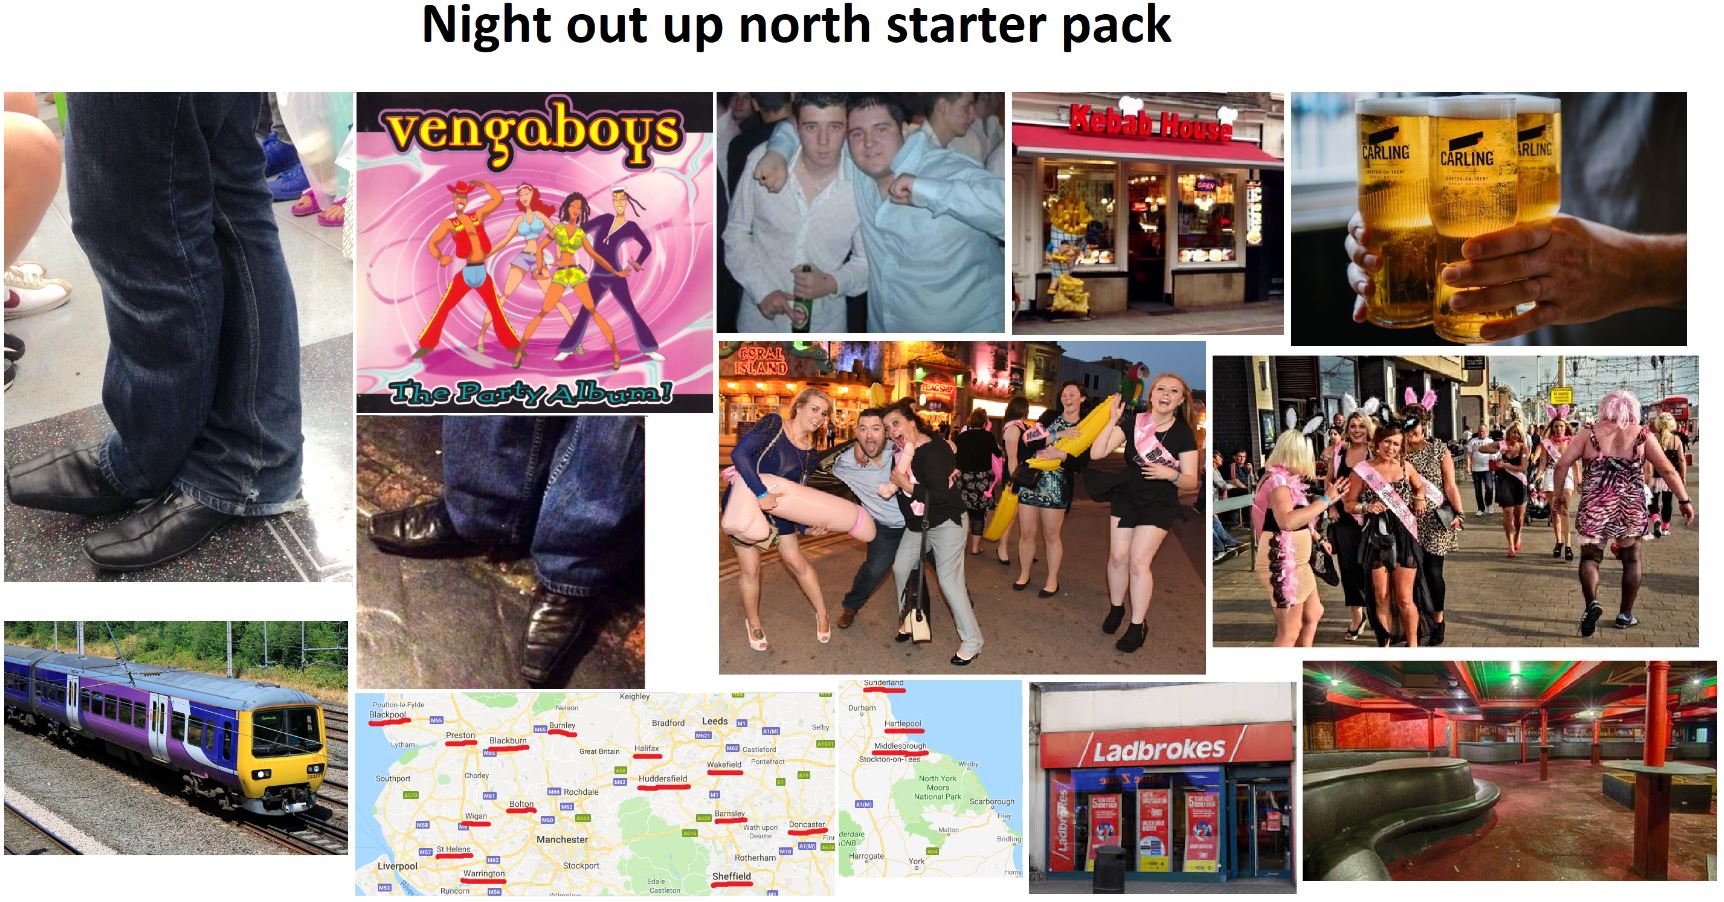 night out in the north starter pack - Night out up north starter pack vengaboys Carling Carlingerline Coral Island The PartyAlbuma! Sunderland Poulion la Fylde Blackpool Durham Ms Burnley Bradford Leeds Hartlepool Lytham sem Middlesbrough Great Britain # 